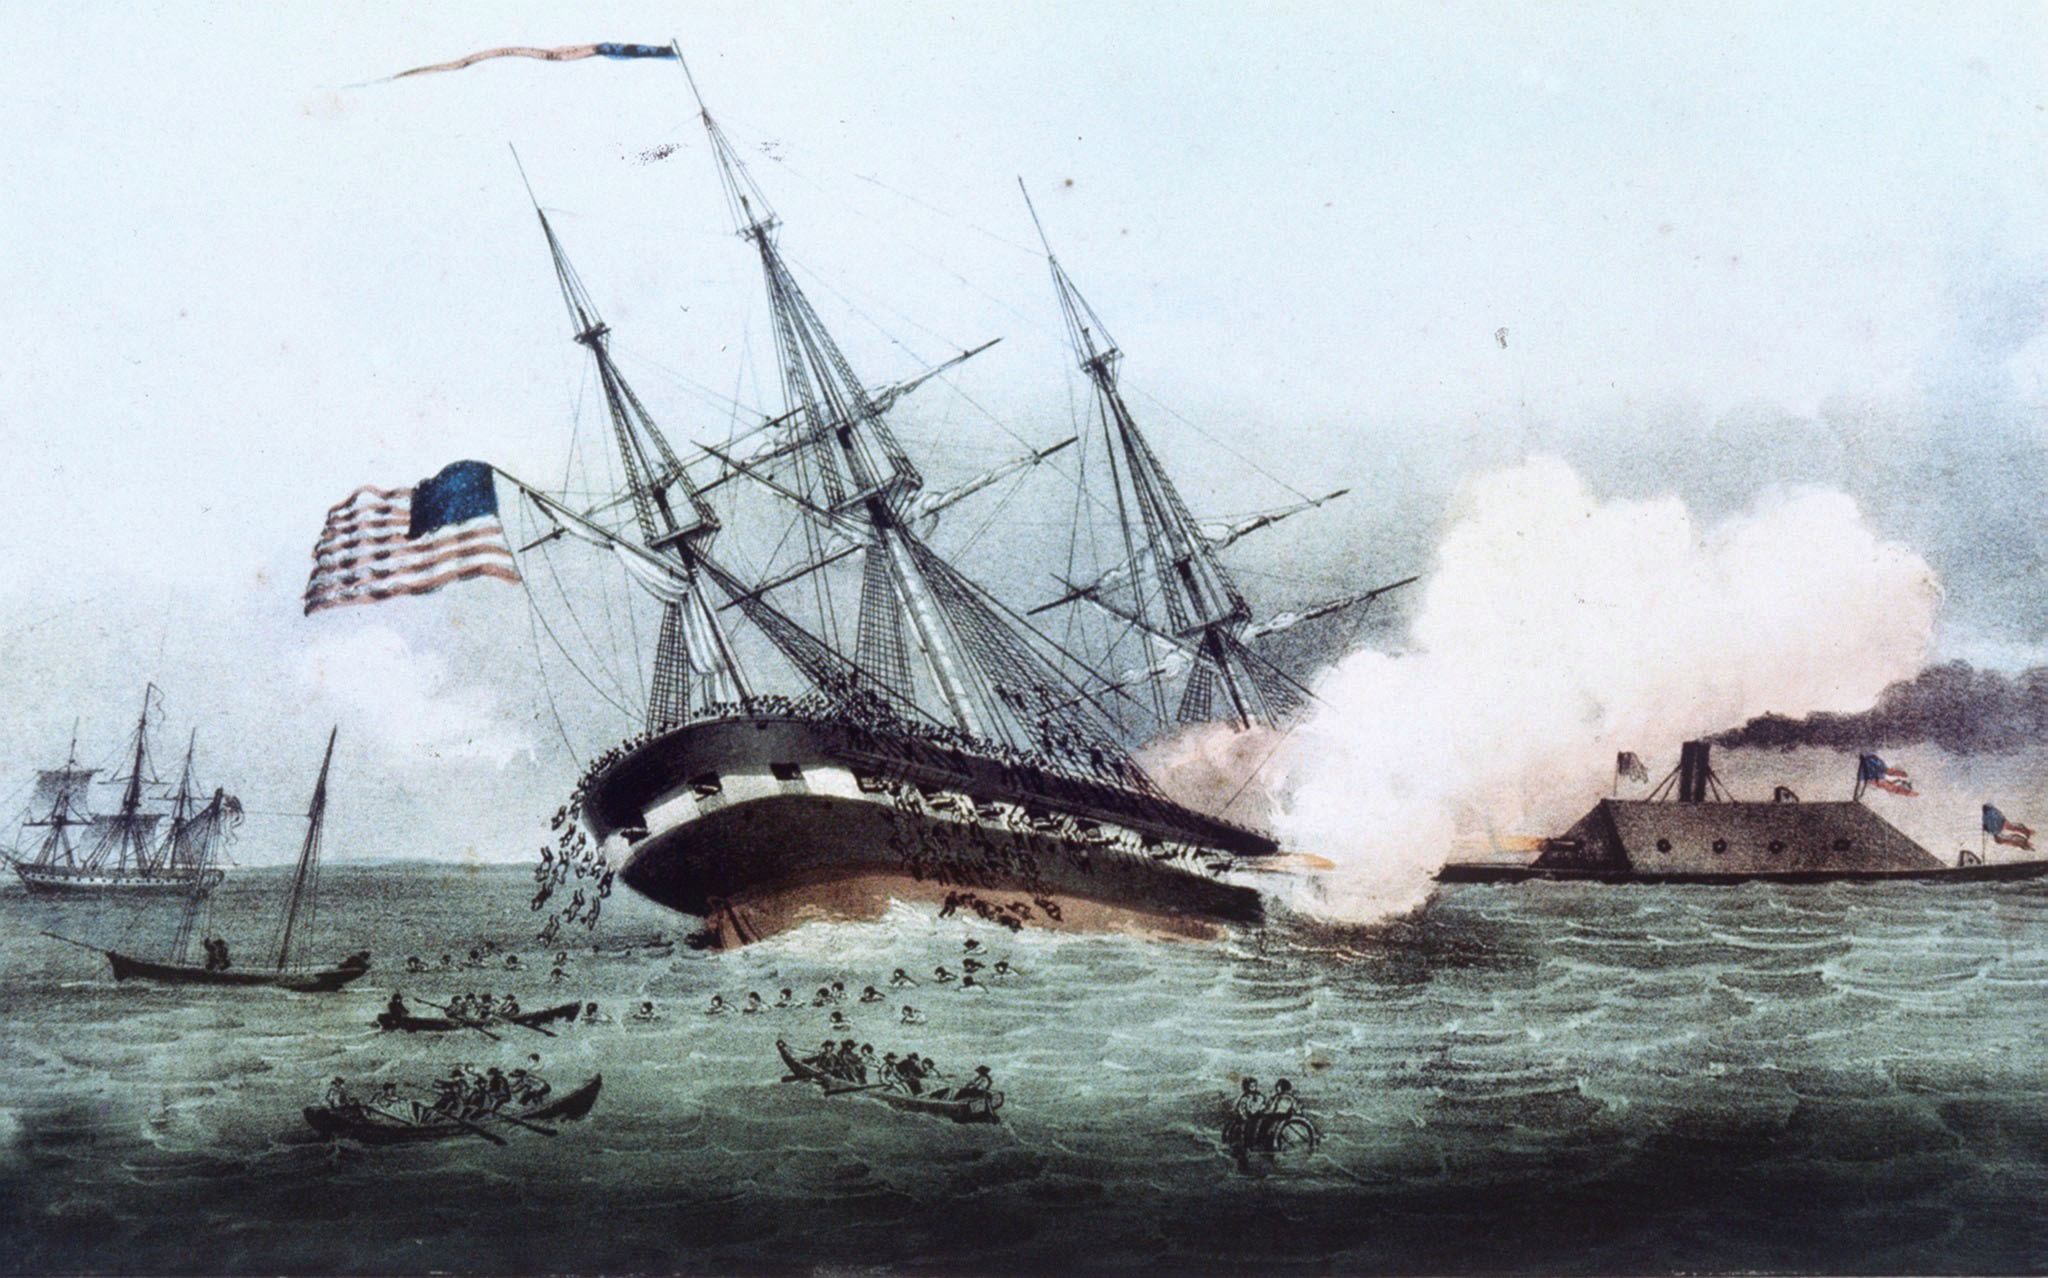 With the USS Monitor still in the Atlantic Ocean, the CSS Virginia rammed and sank the USS Cumberland off Newport News Point. The Virginia's iron ram plowed deep into the Cumberland’s starboard bow.